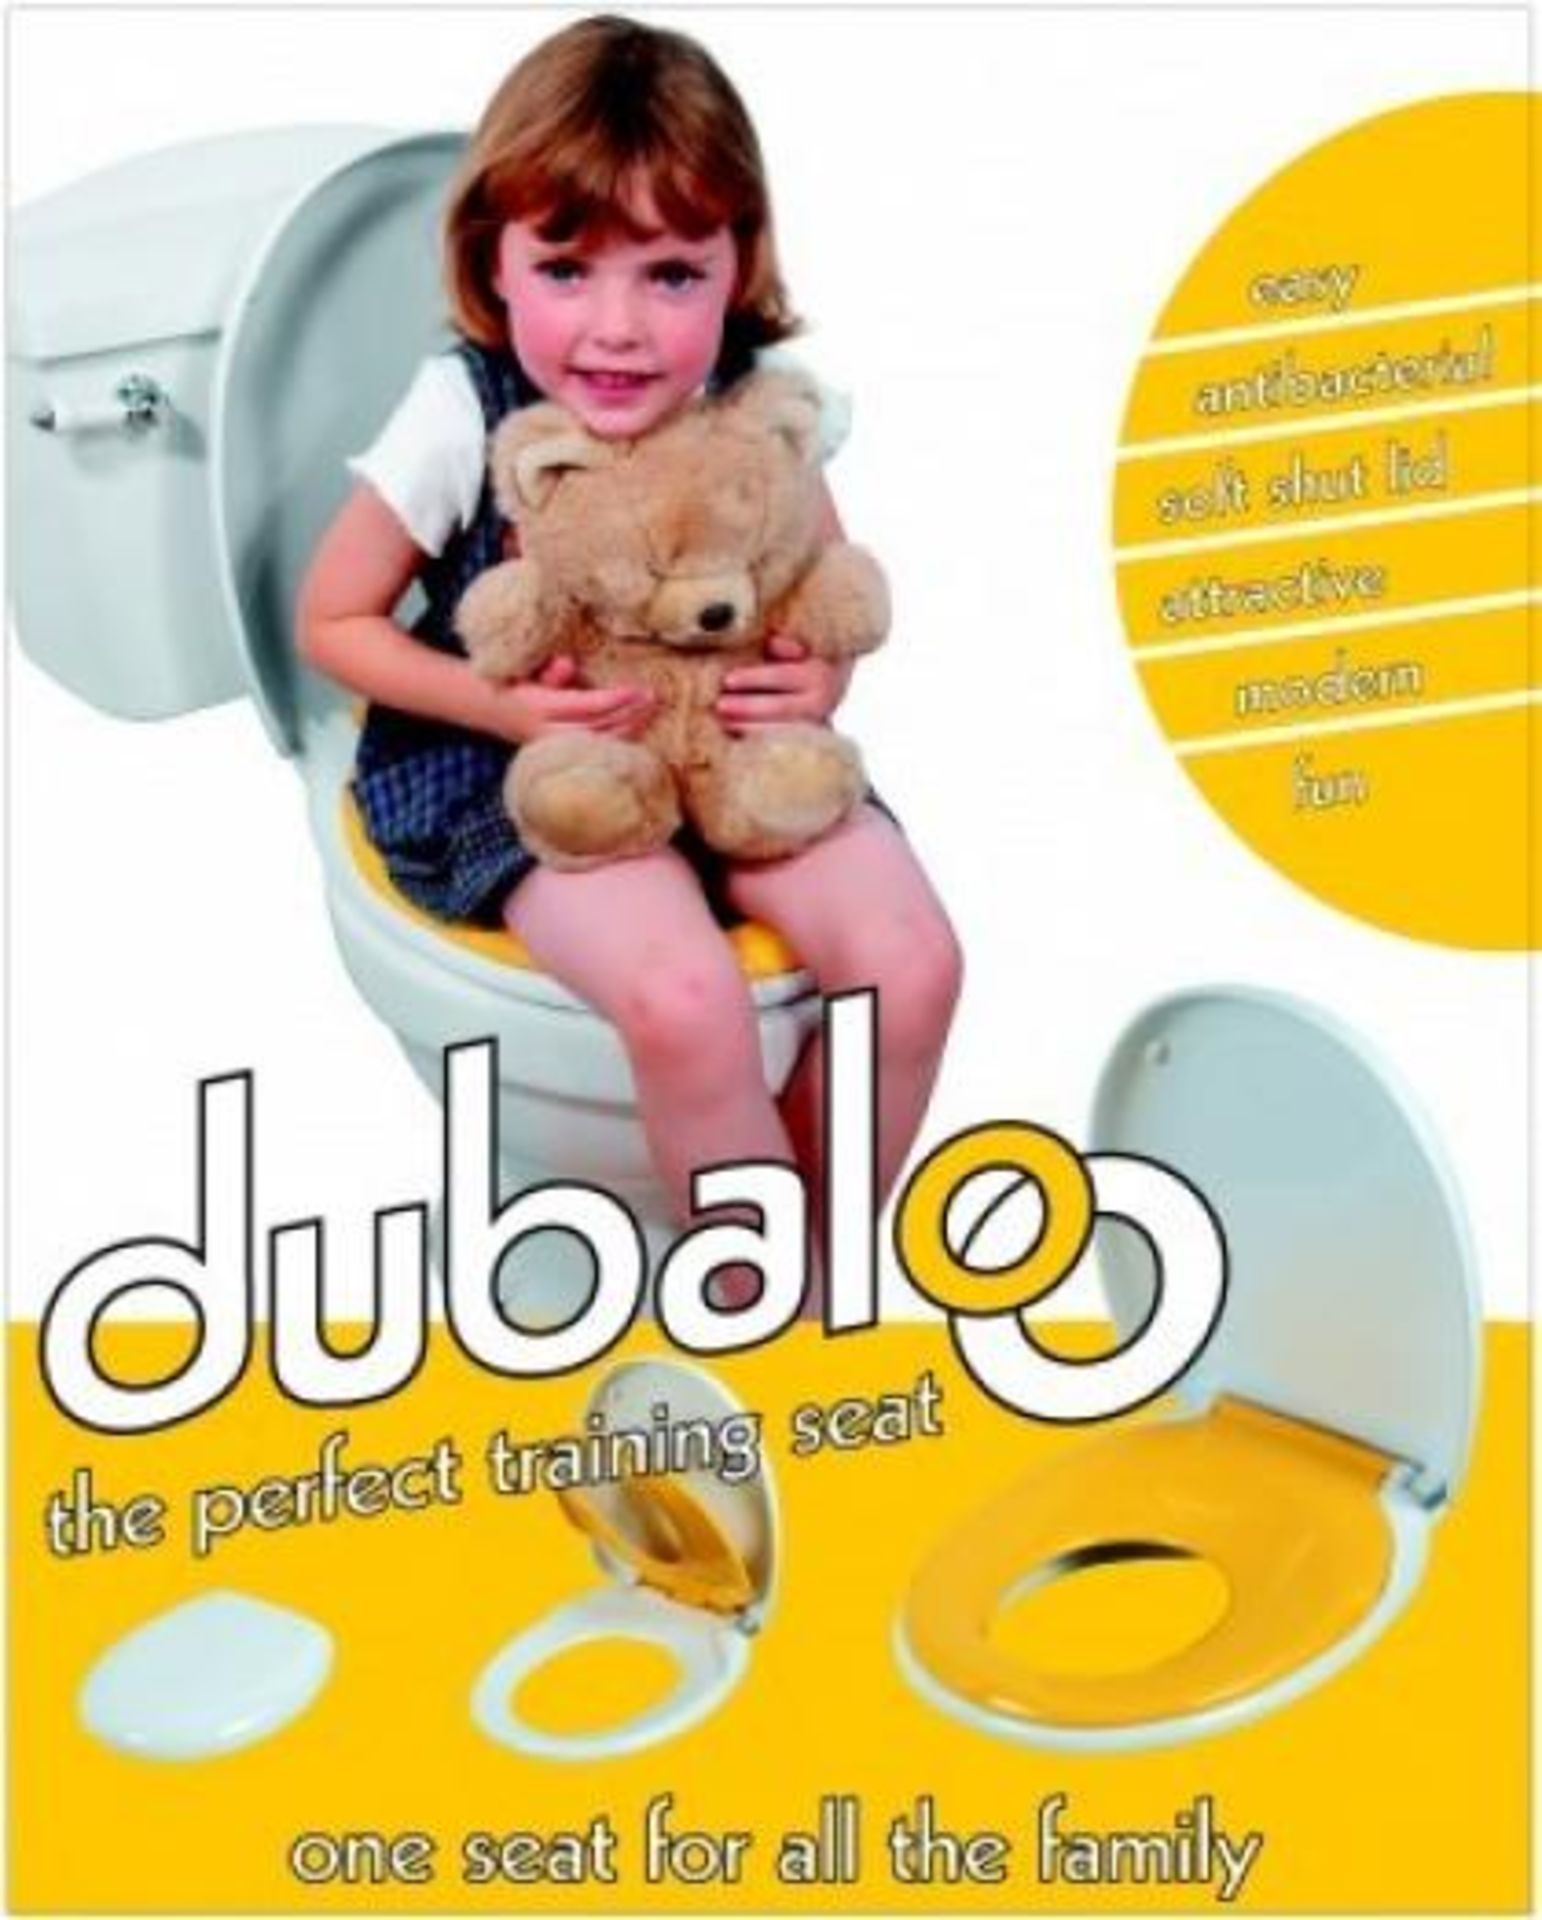 1 x Dubaloo 2 in 1 Family Training Toilet Seat - One Seat For All The Family - Full Size Toilet Seat - Image 6 of 7